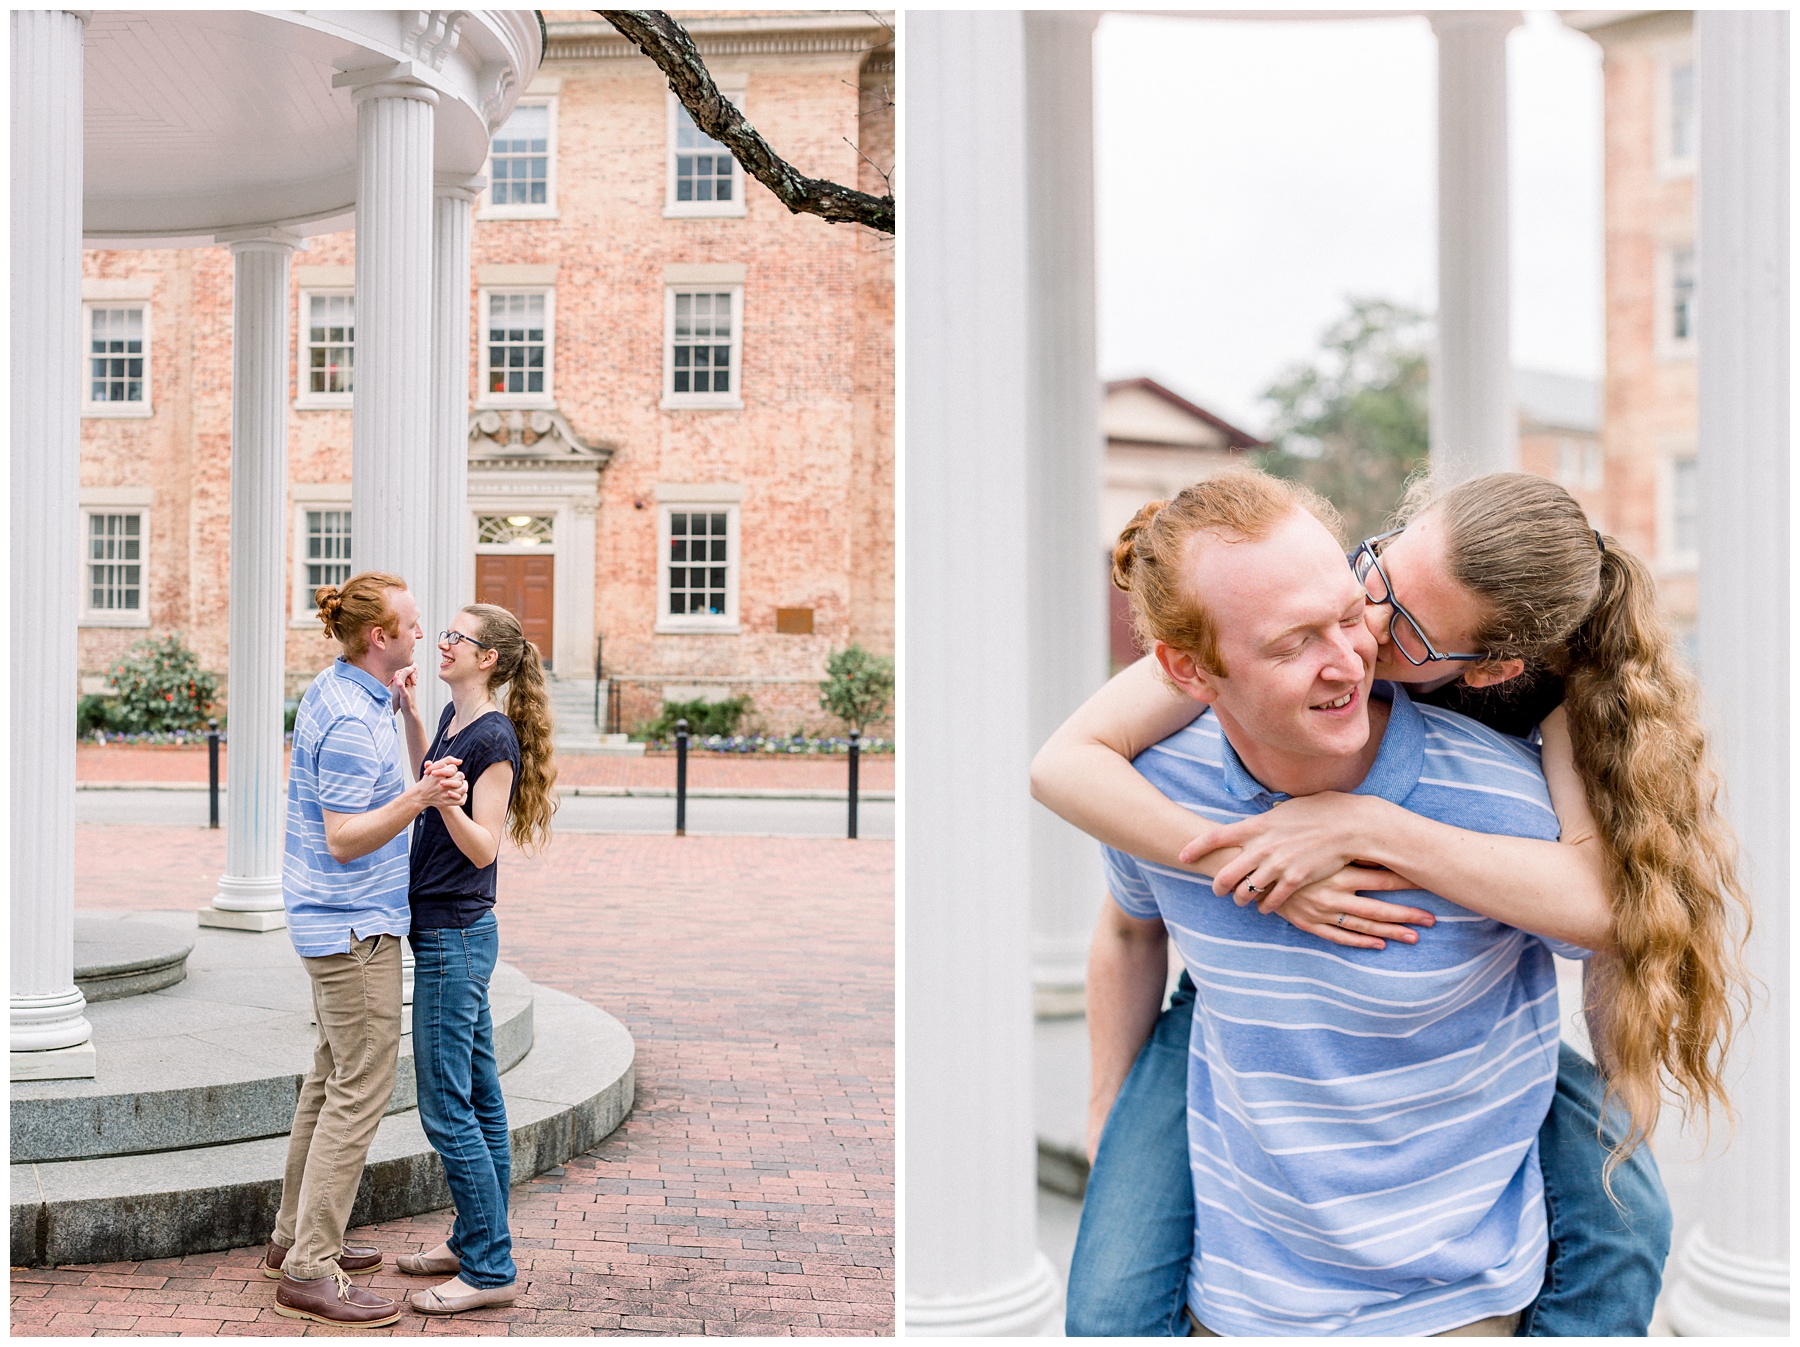 Spring Engagement Session at UNC Chapel Hill at The Well. North Carolina Wedding Photographer.